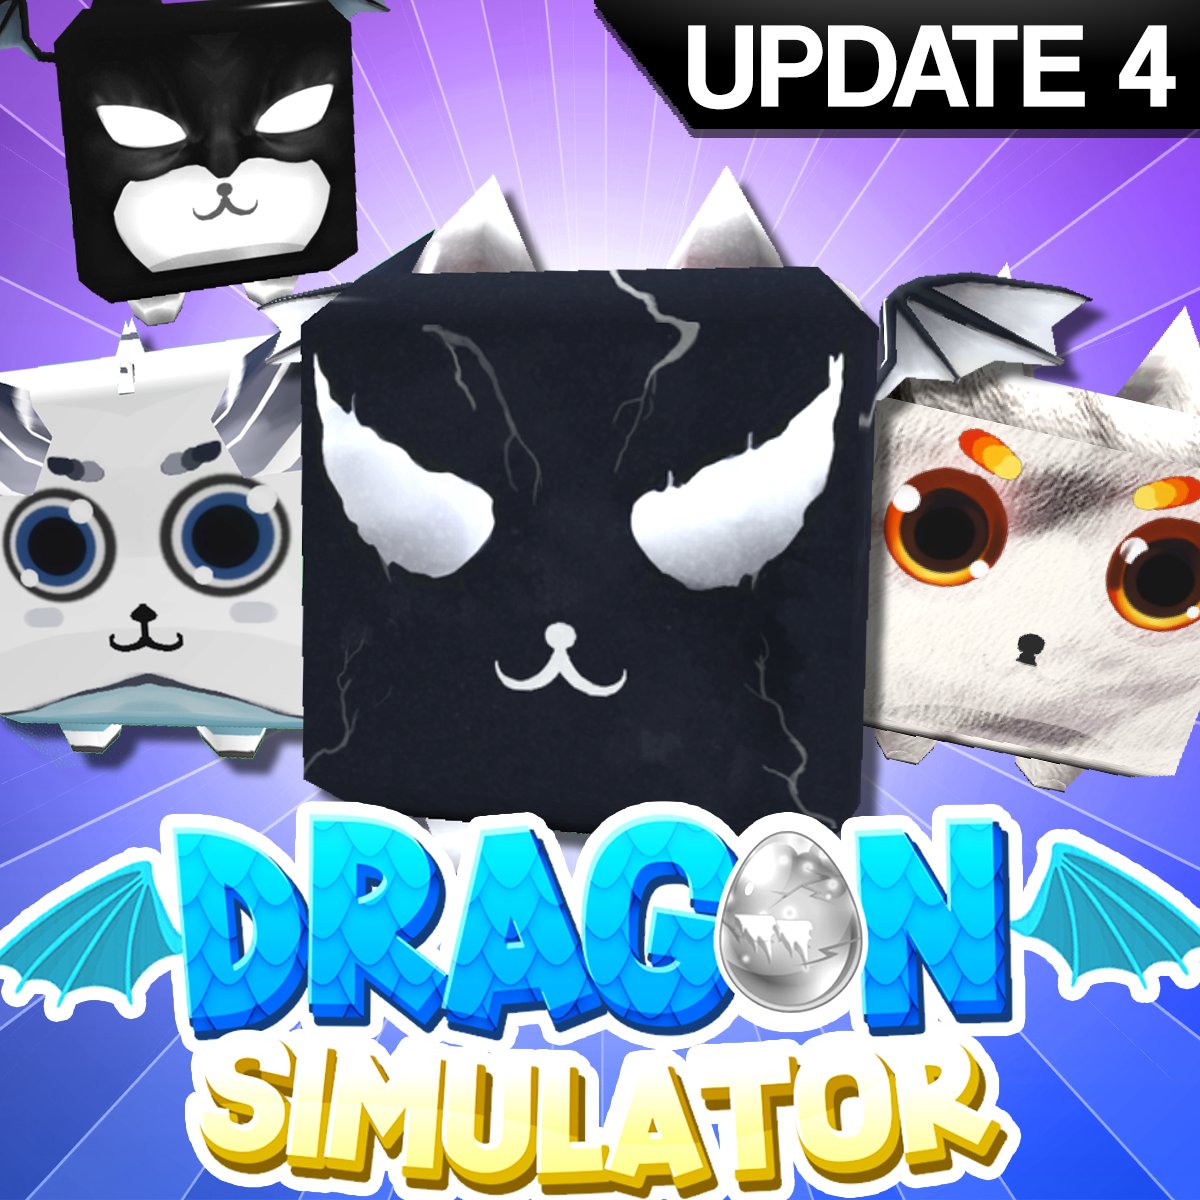 Coolbulls A Twitter Update 4 Is Out Code Update4 New Map Sky Castle Two Limited Dragons Get The Venom And Batman Dragons Only Available For The Next Month - coolbulls on twitter pet ranch simulator 2 is coming very soon roblox